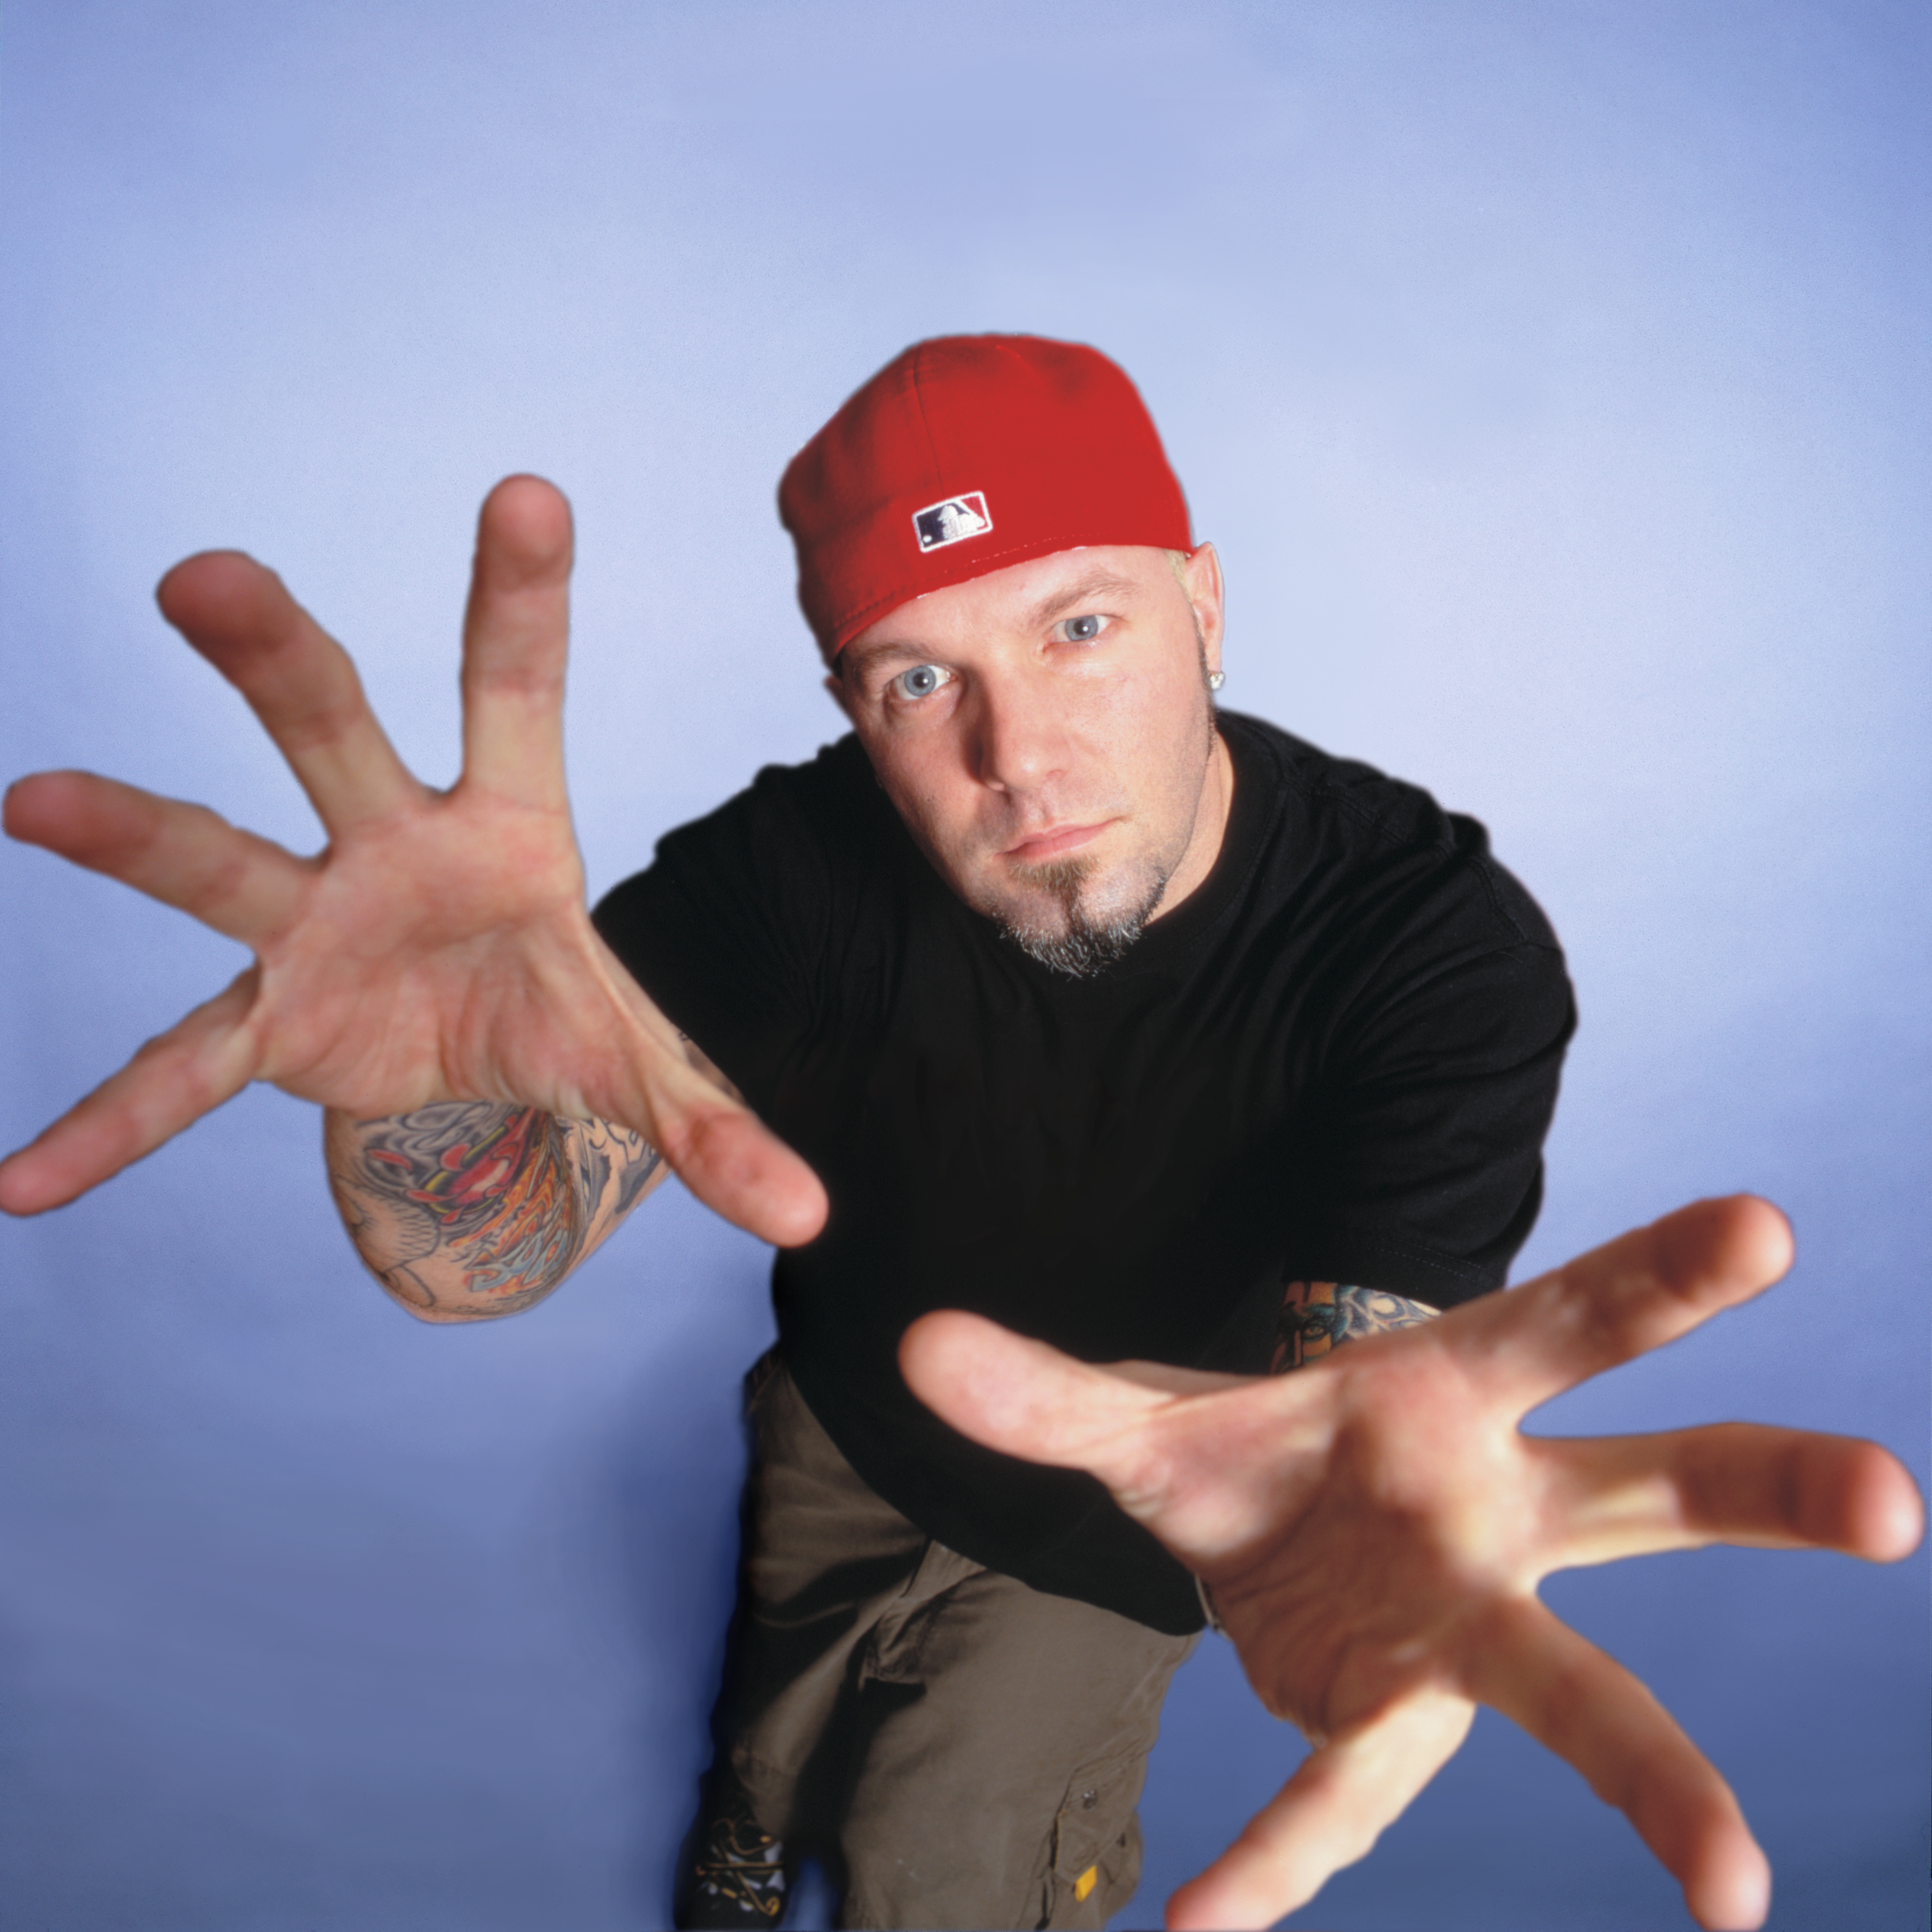 Limp Bizkit had a huge global following back in the day